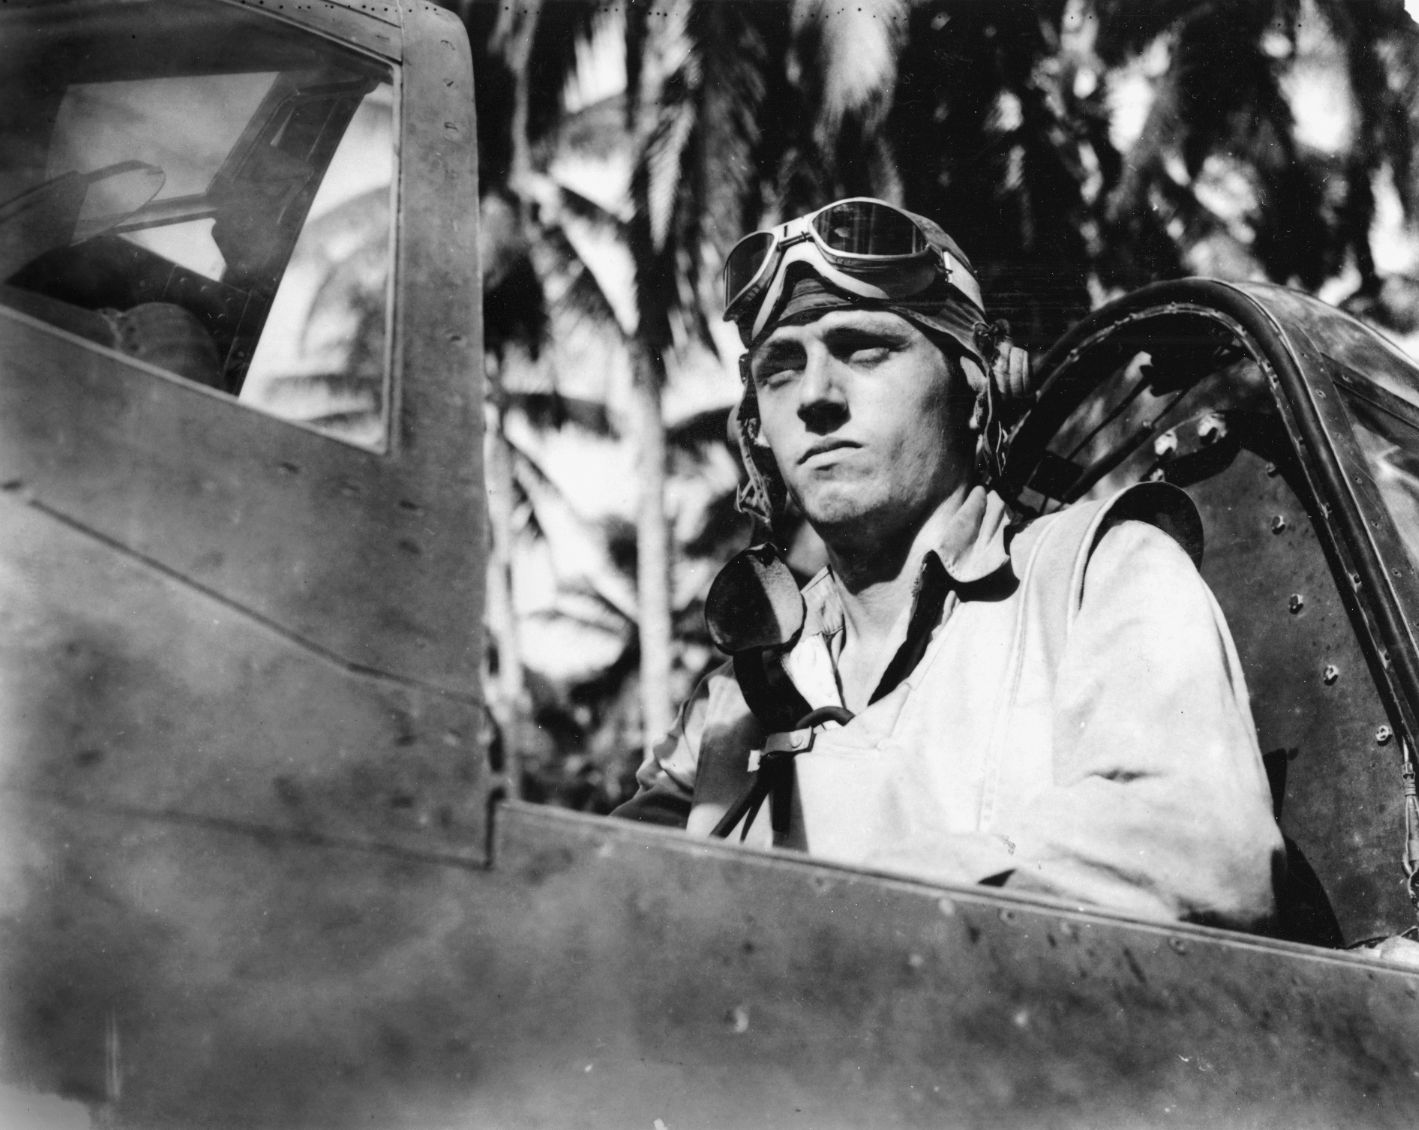 Captain Thomas M. “Tommy” Tomlinson, a former Wildcat fighter pilot, sits in the cockpit of his Chance Vought F4U-1 Corsair fighter on Guadalcanal. The Wildcat helped hold the line against the Japanese during the early days of the Pacific War.